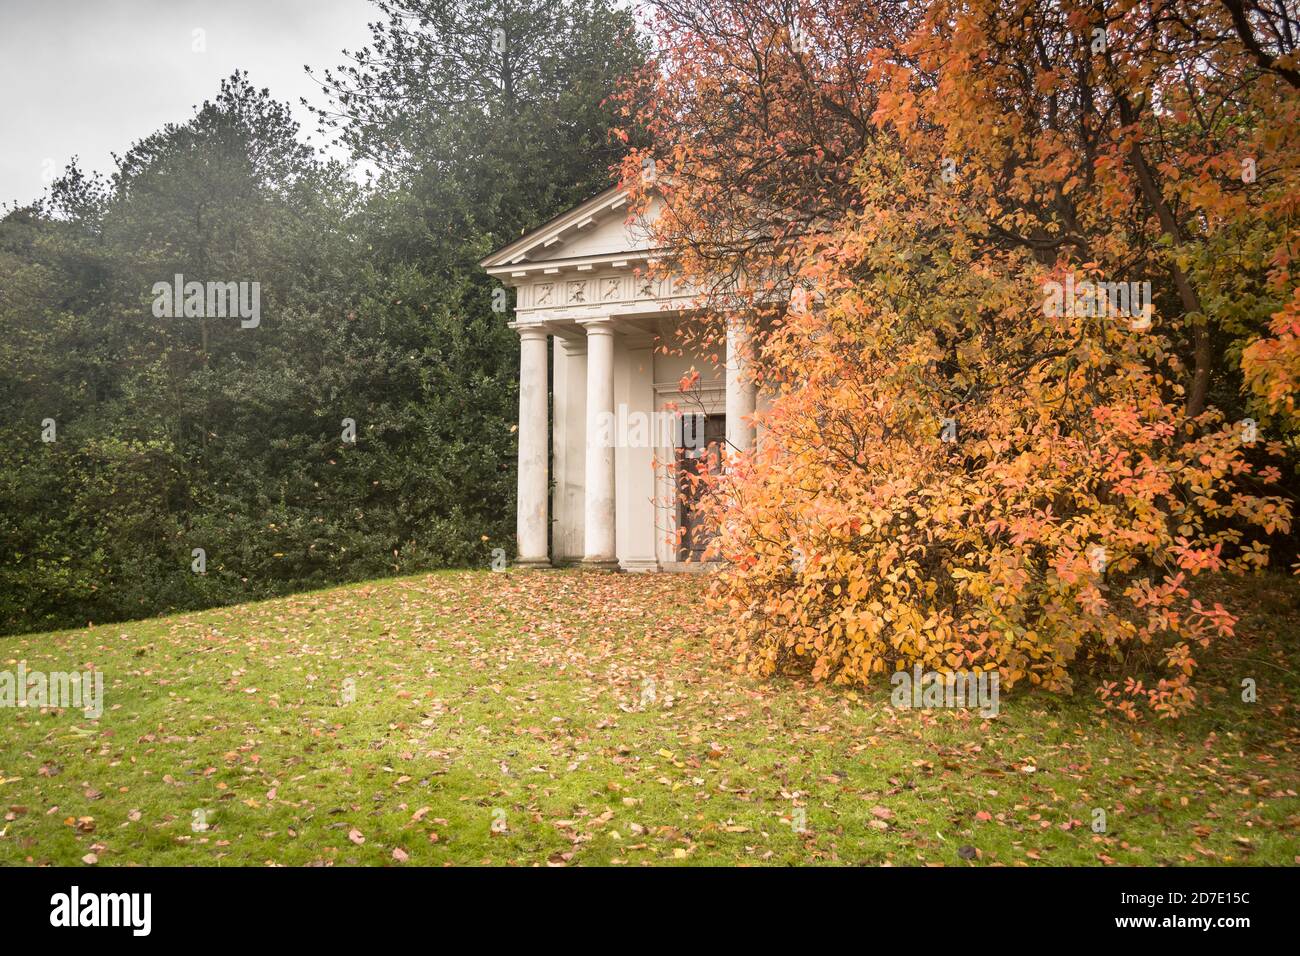 Sir William Chambers' The Temple of Bellona in Kew Gardens, London, UK Stock Photo